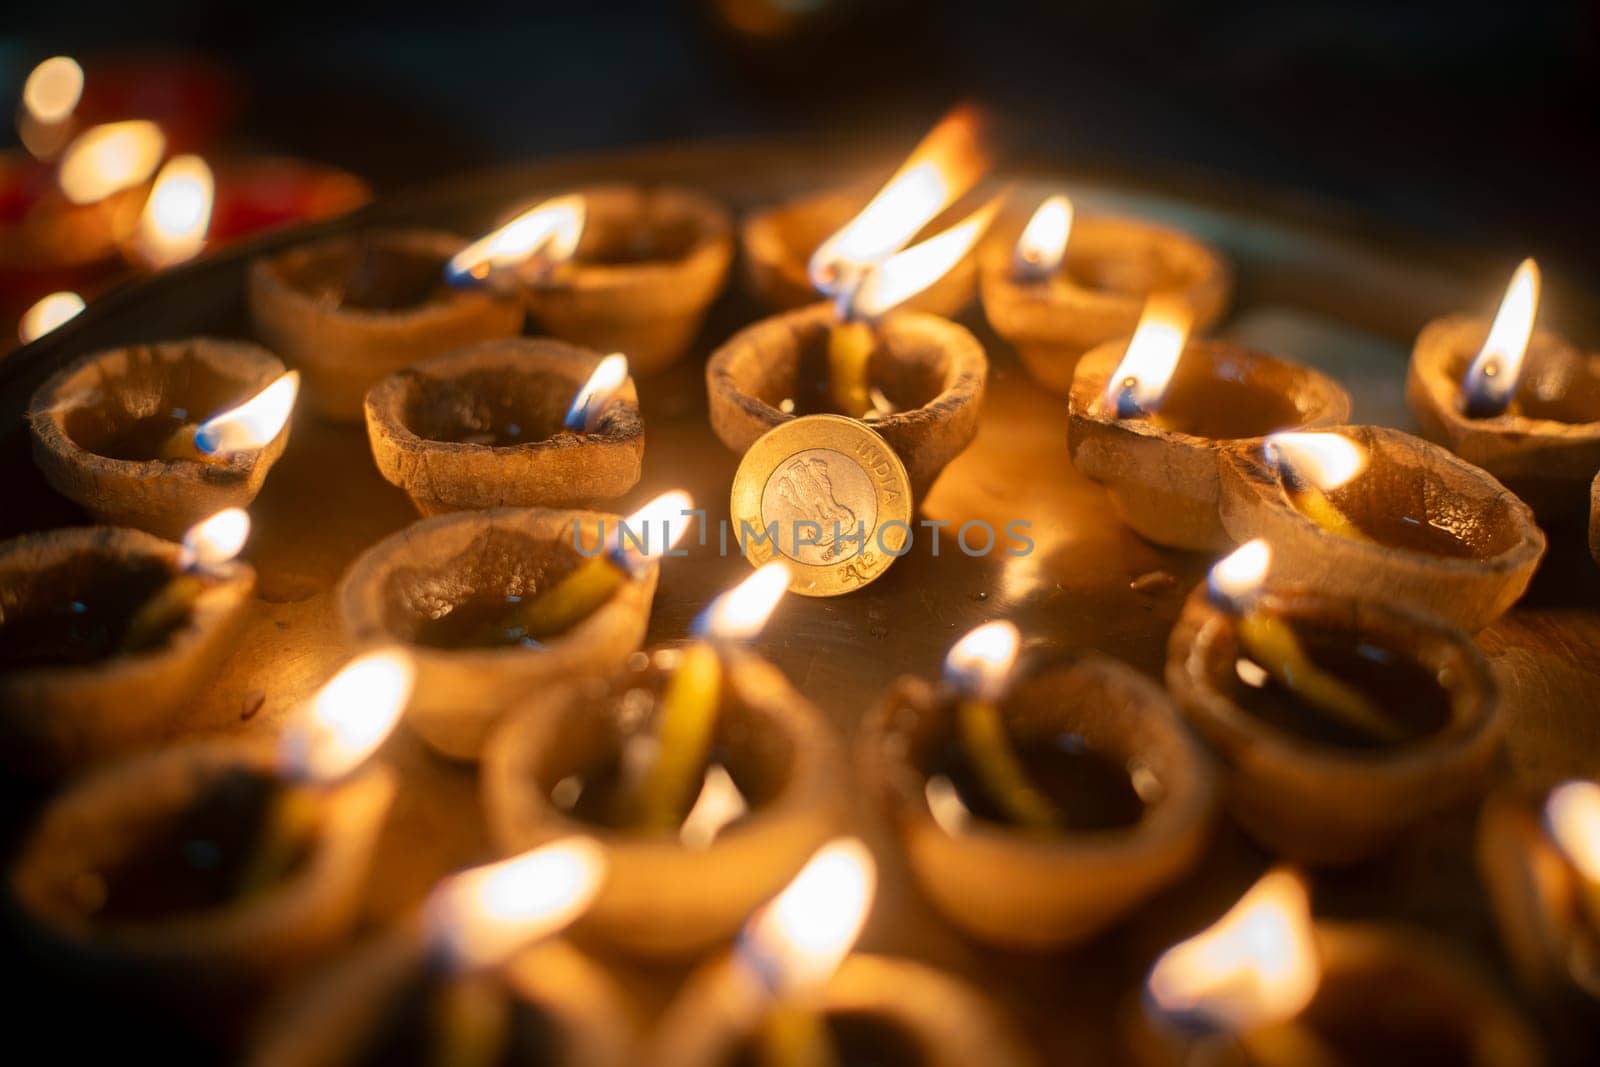 macro shot showing a circle of diya oil lamps around a rupee coin showing the offerings and prayers to the hindu wealth goddess lakshmi by Shalinimathur